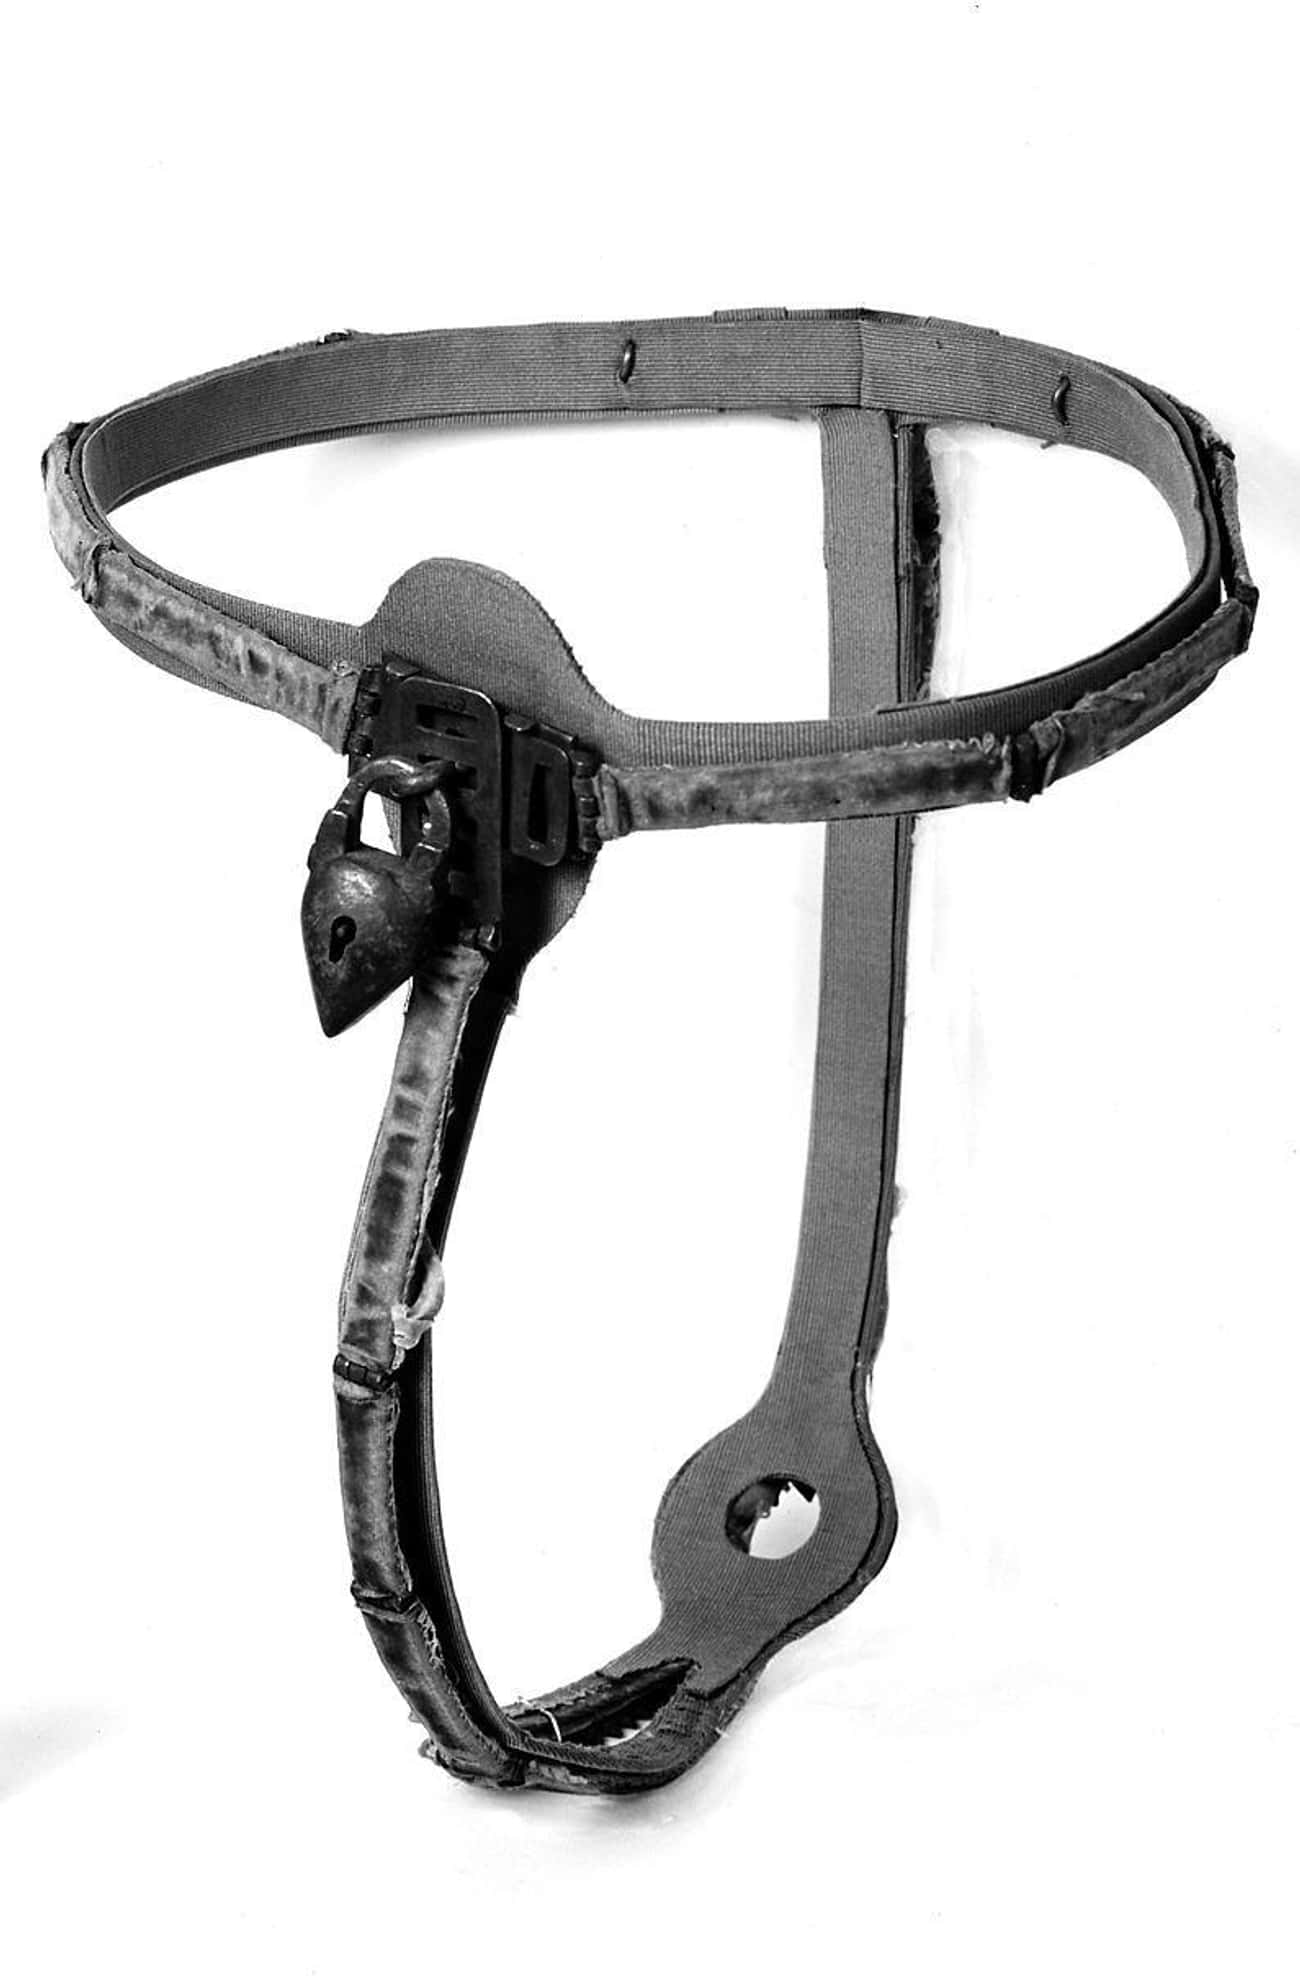 Chastity Belts Would Actually Cause Infections, Sepsis, And Death